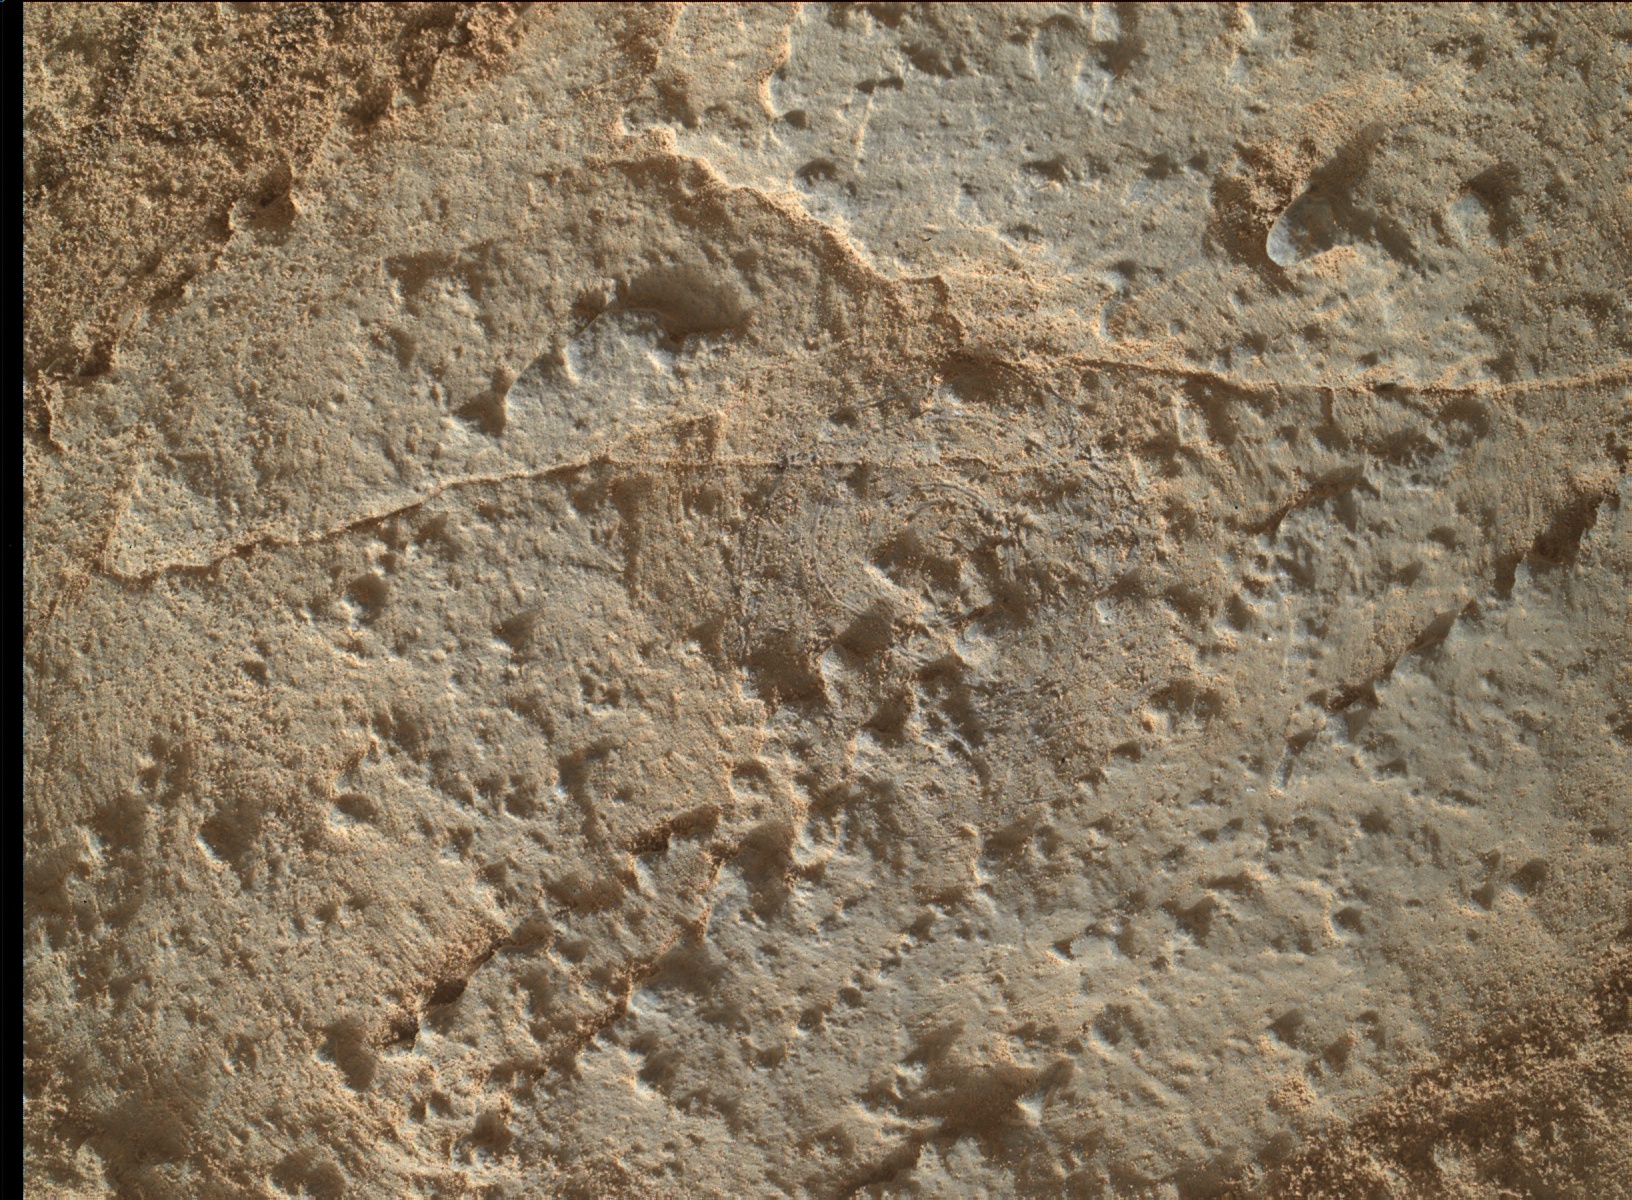 Nasa's Mars rover Curiosity acquired this image using its Mars Hand Lens Imager (MAHLI) on Sol 1105